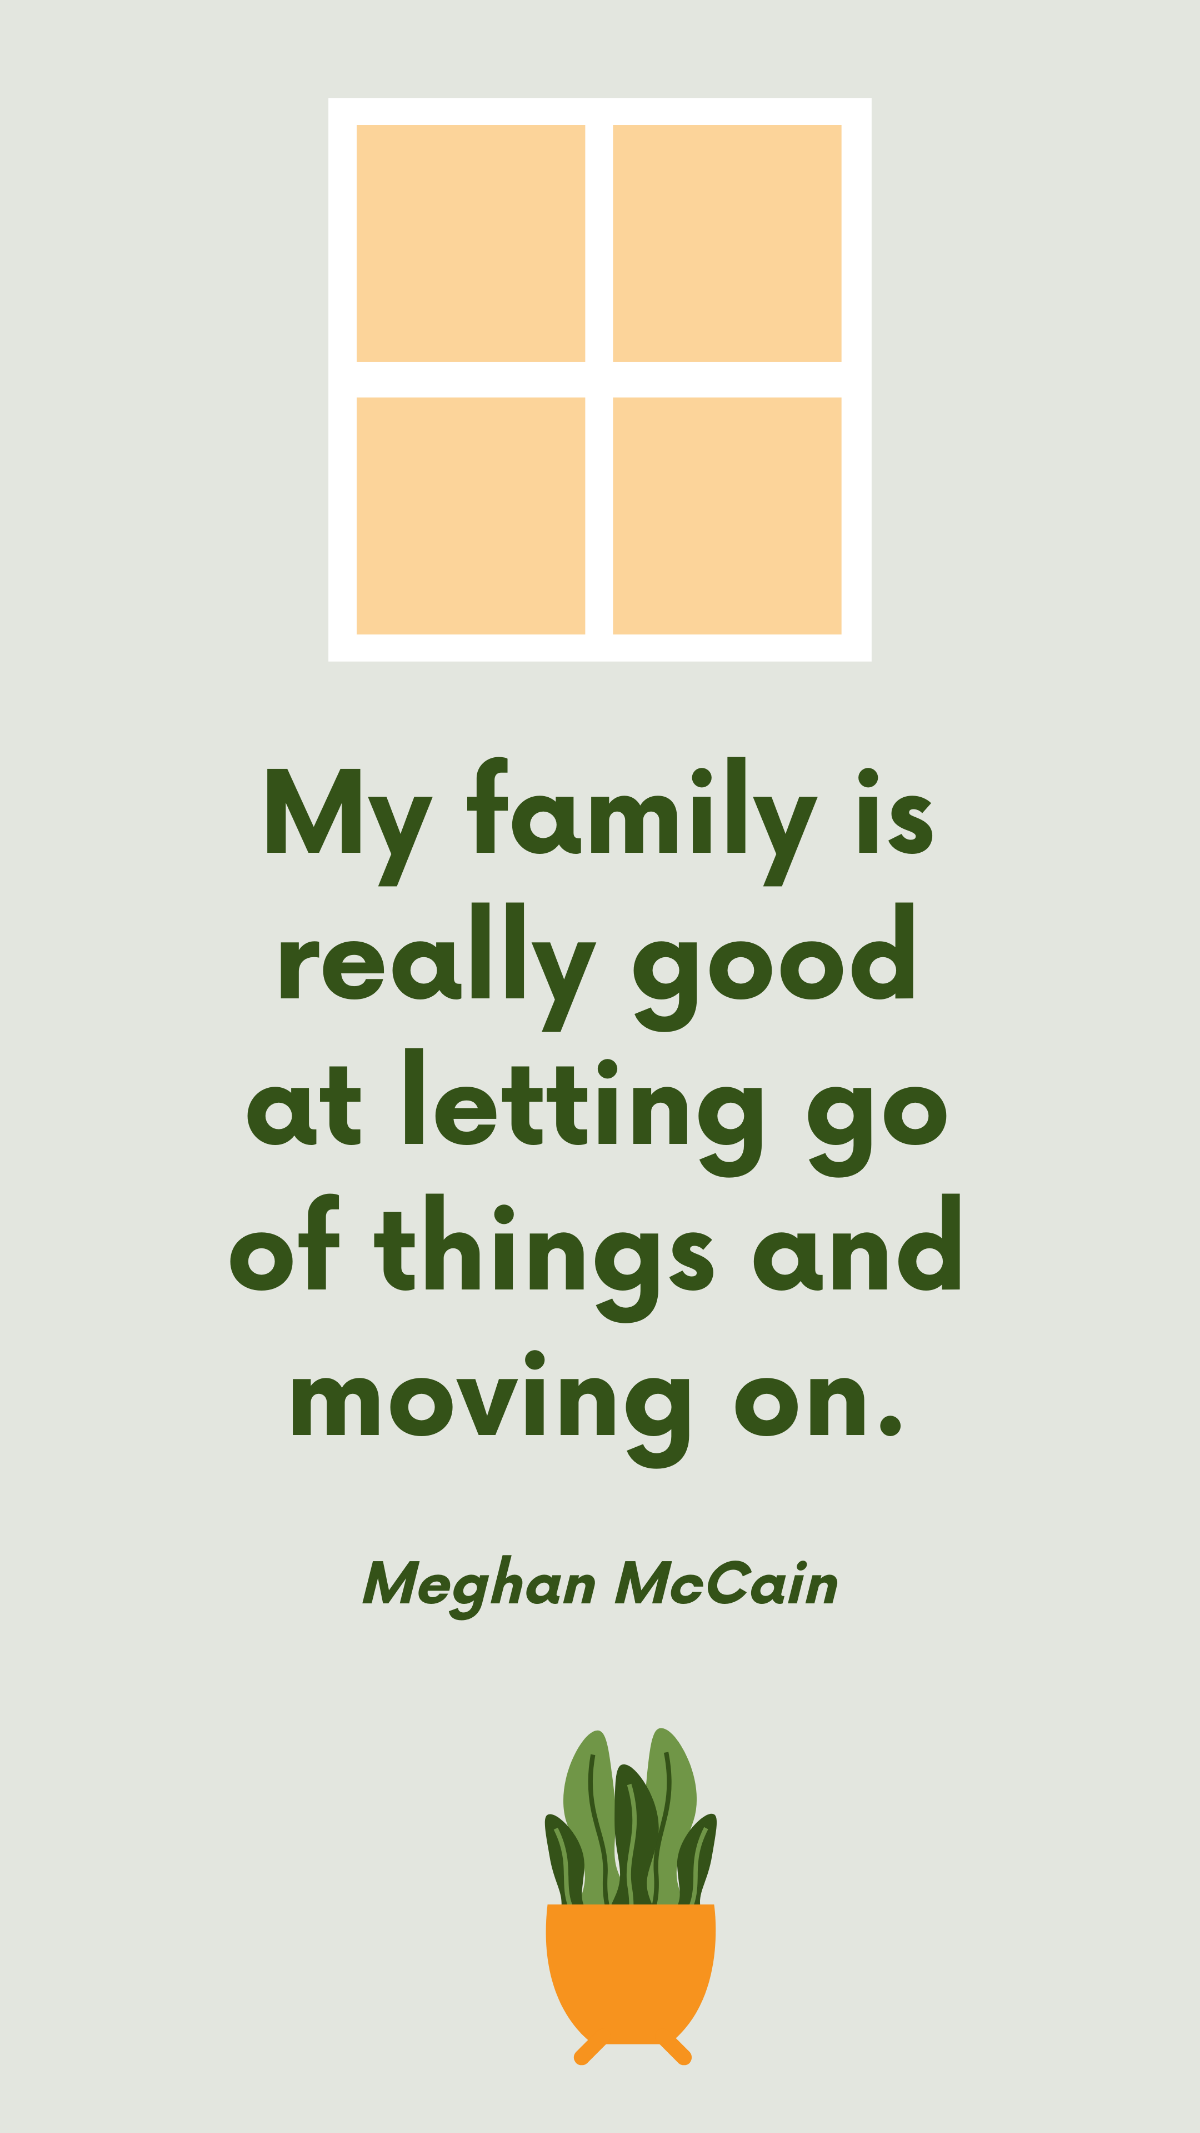 Free Meghan McCain - My family is really good at letting go of things and moving on. Template